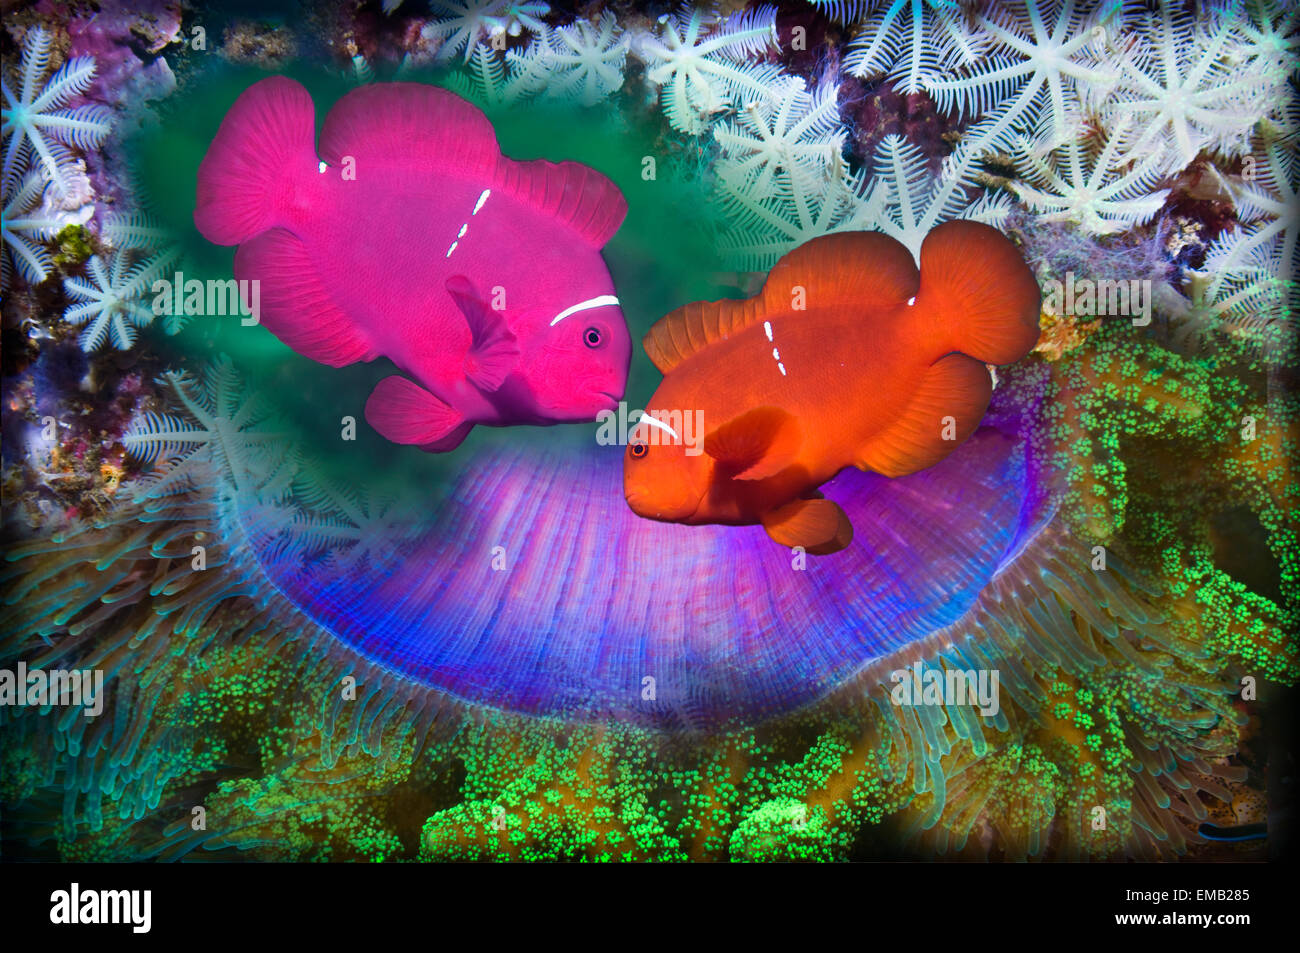 Montage of Spinecheek anemone fish with anemone and corals Stock Photo